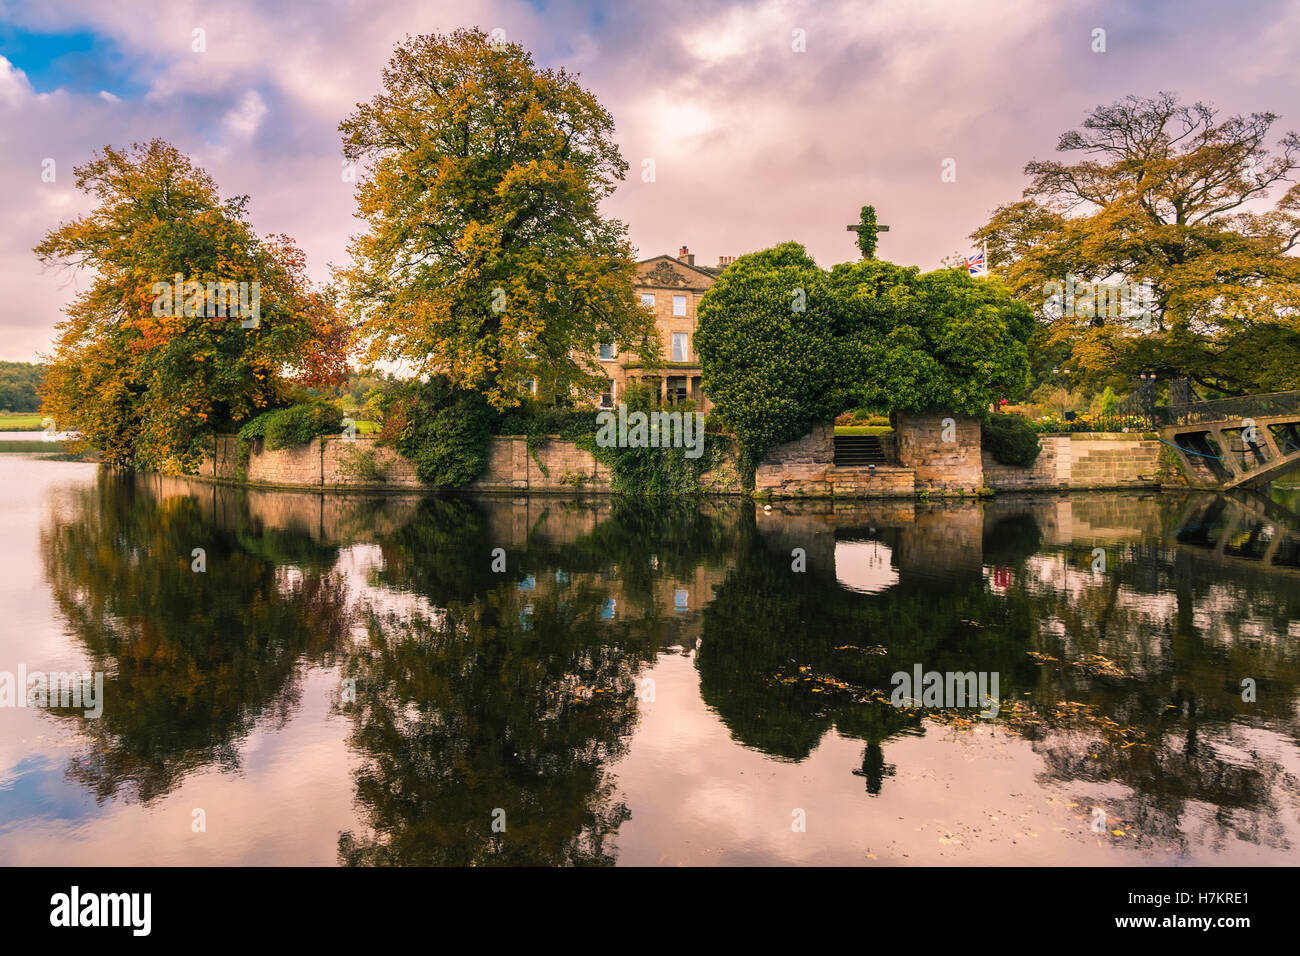 Wakefield, United Kingdom - October 20, 2016: Walton Hall, a 4 star hotel in a scenic setting of rolling parkland. Stock Photo